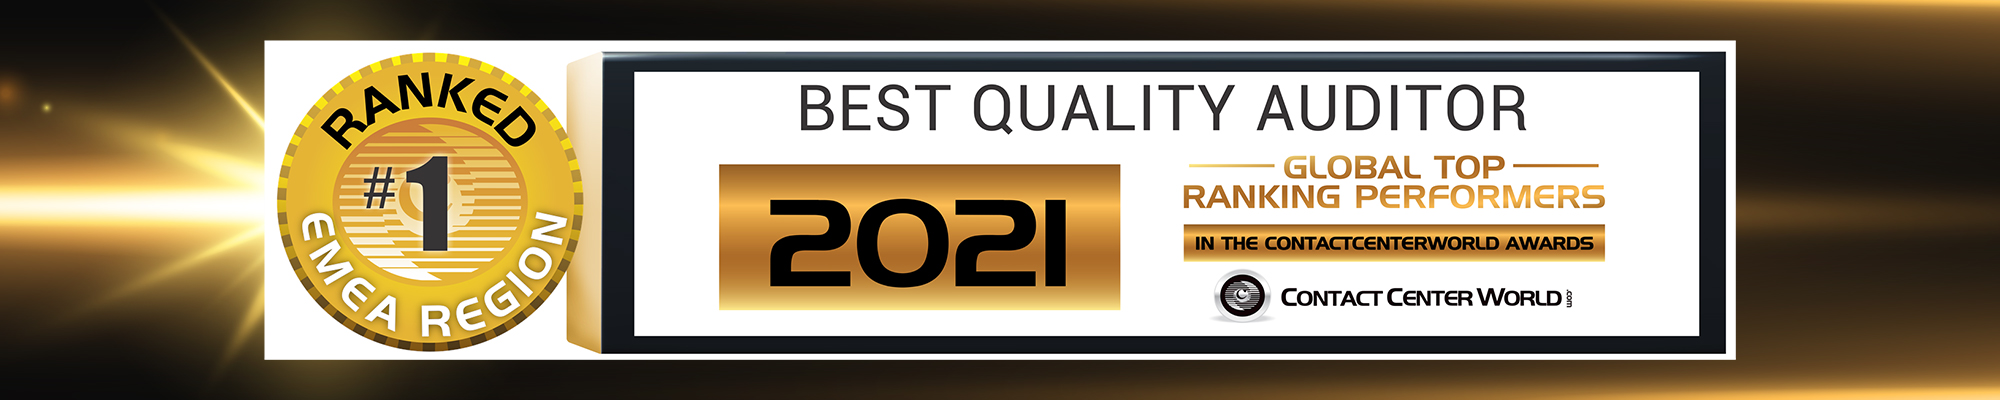 Contact Centre World Top Ranking Performers 2021 Awards